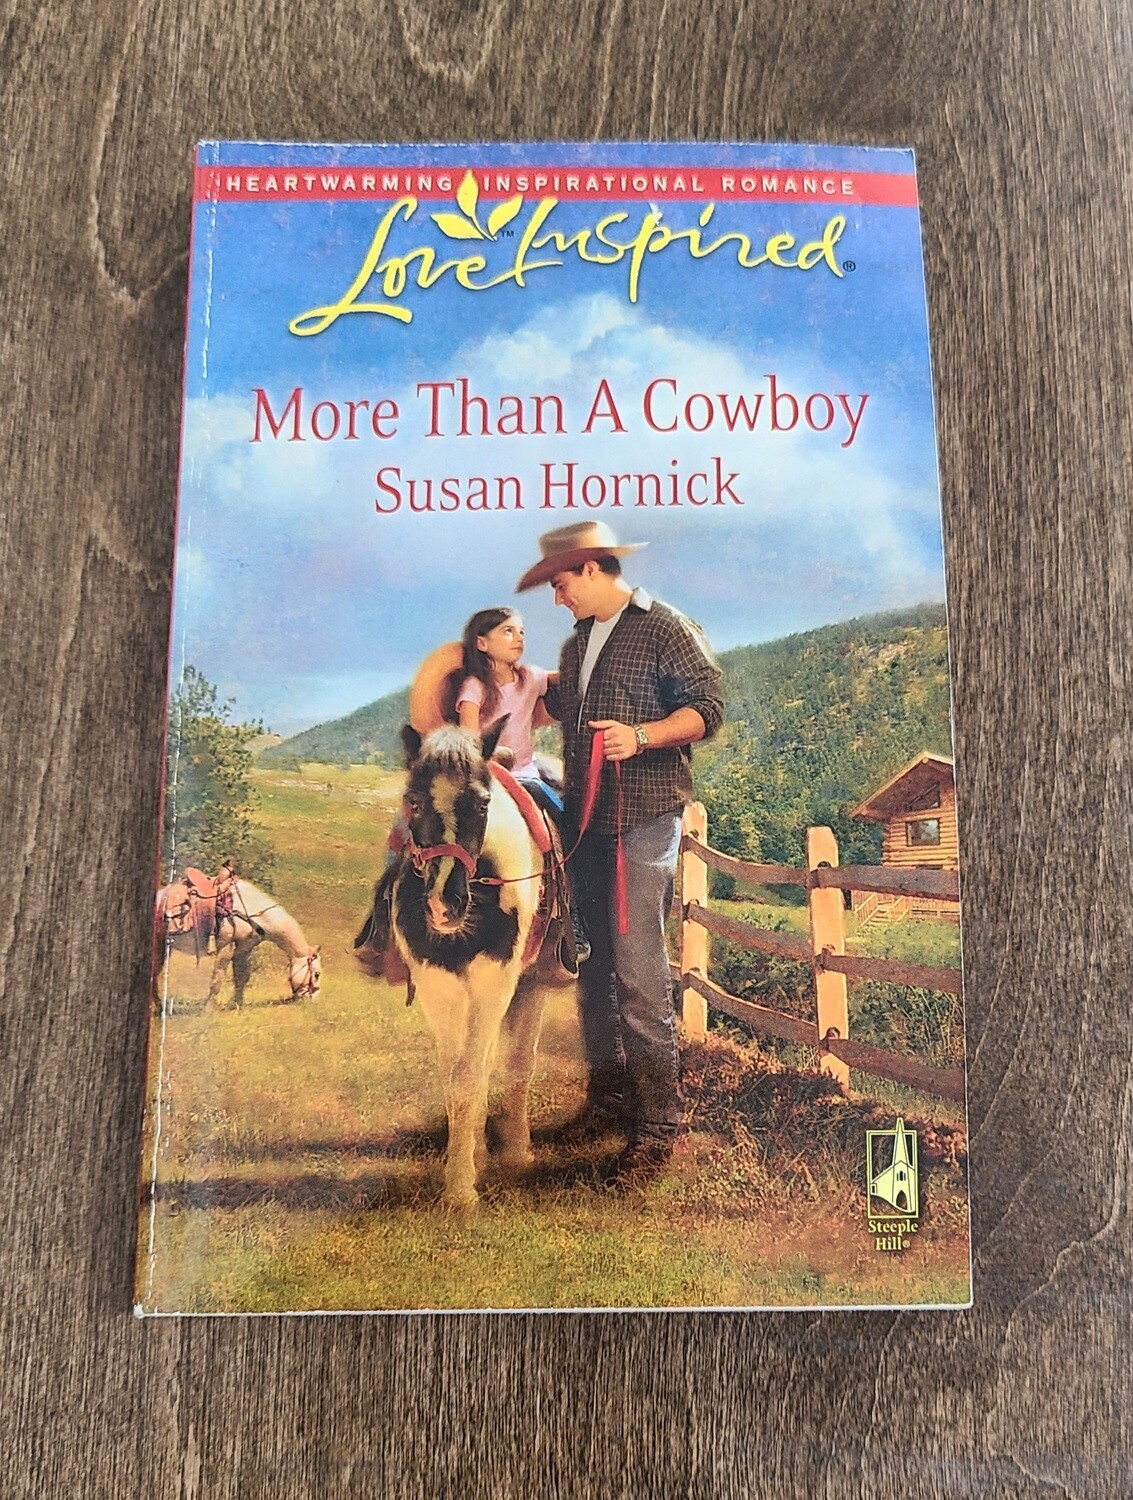 More Than a Cowboy by Susan Hornick